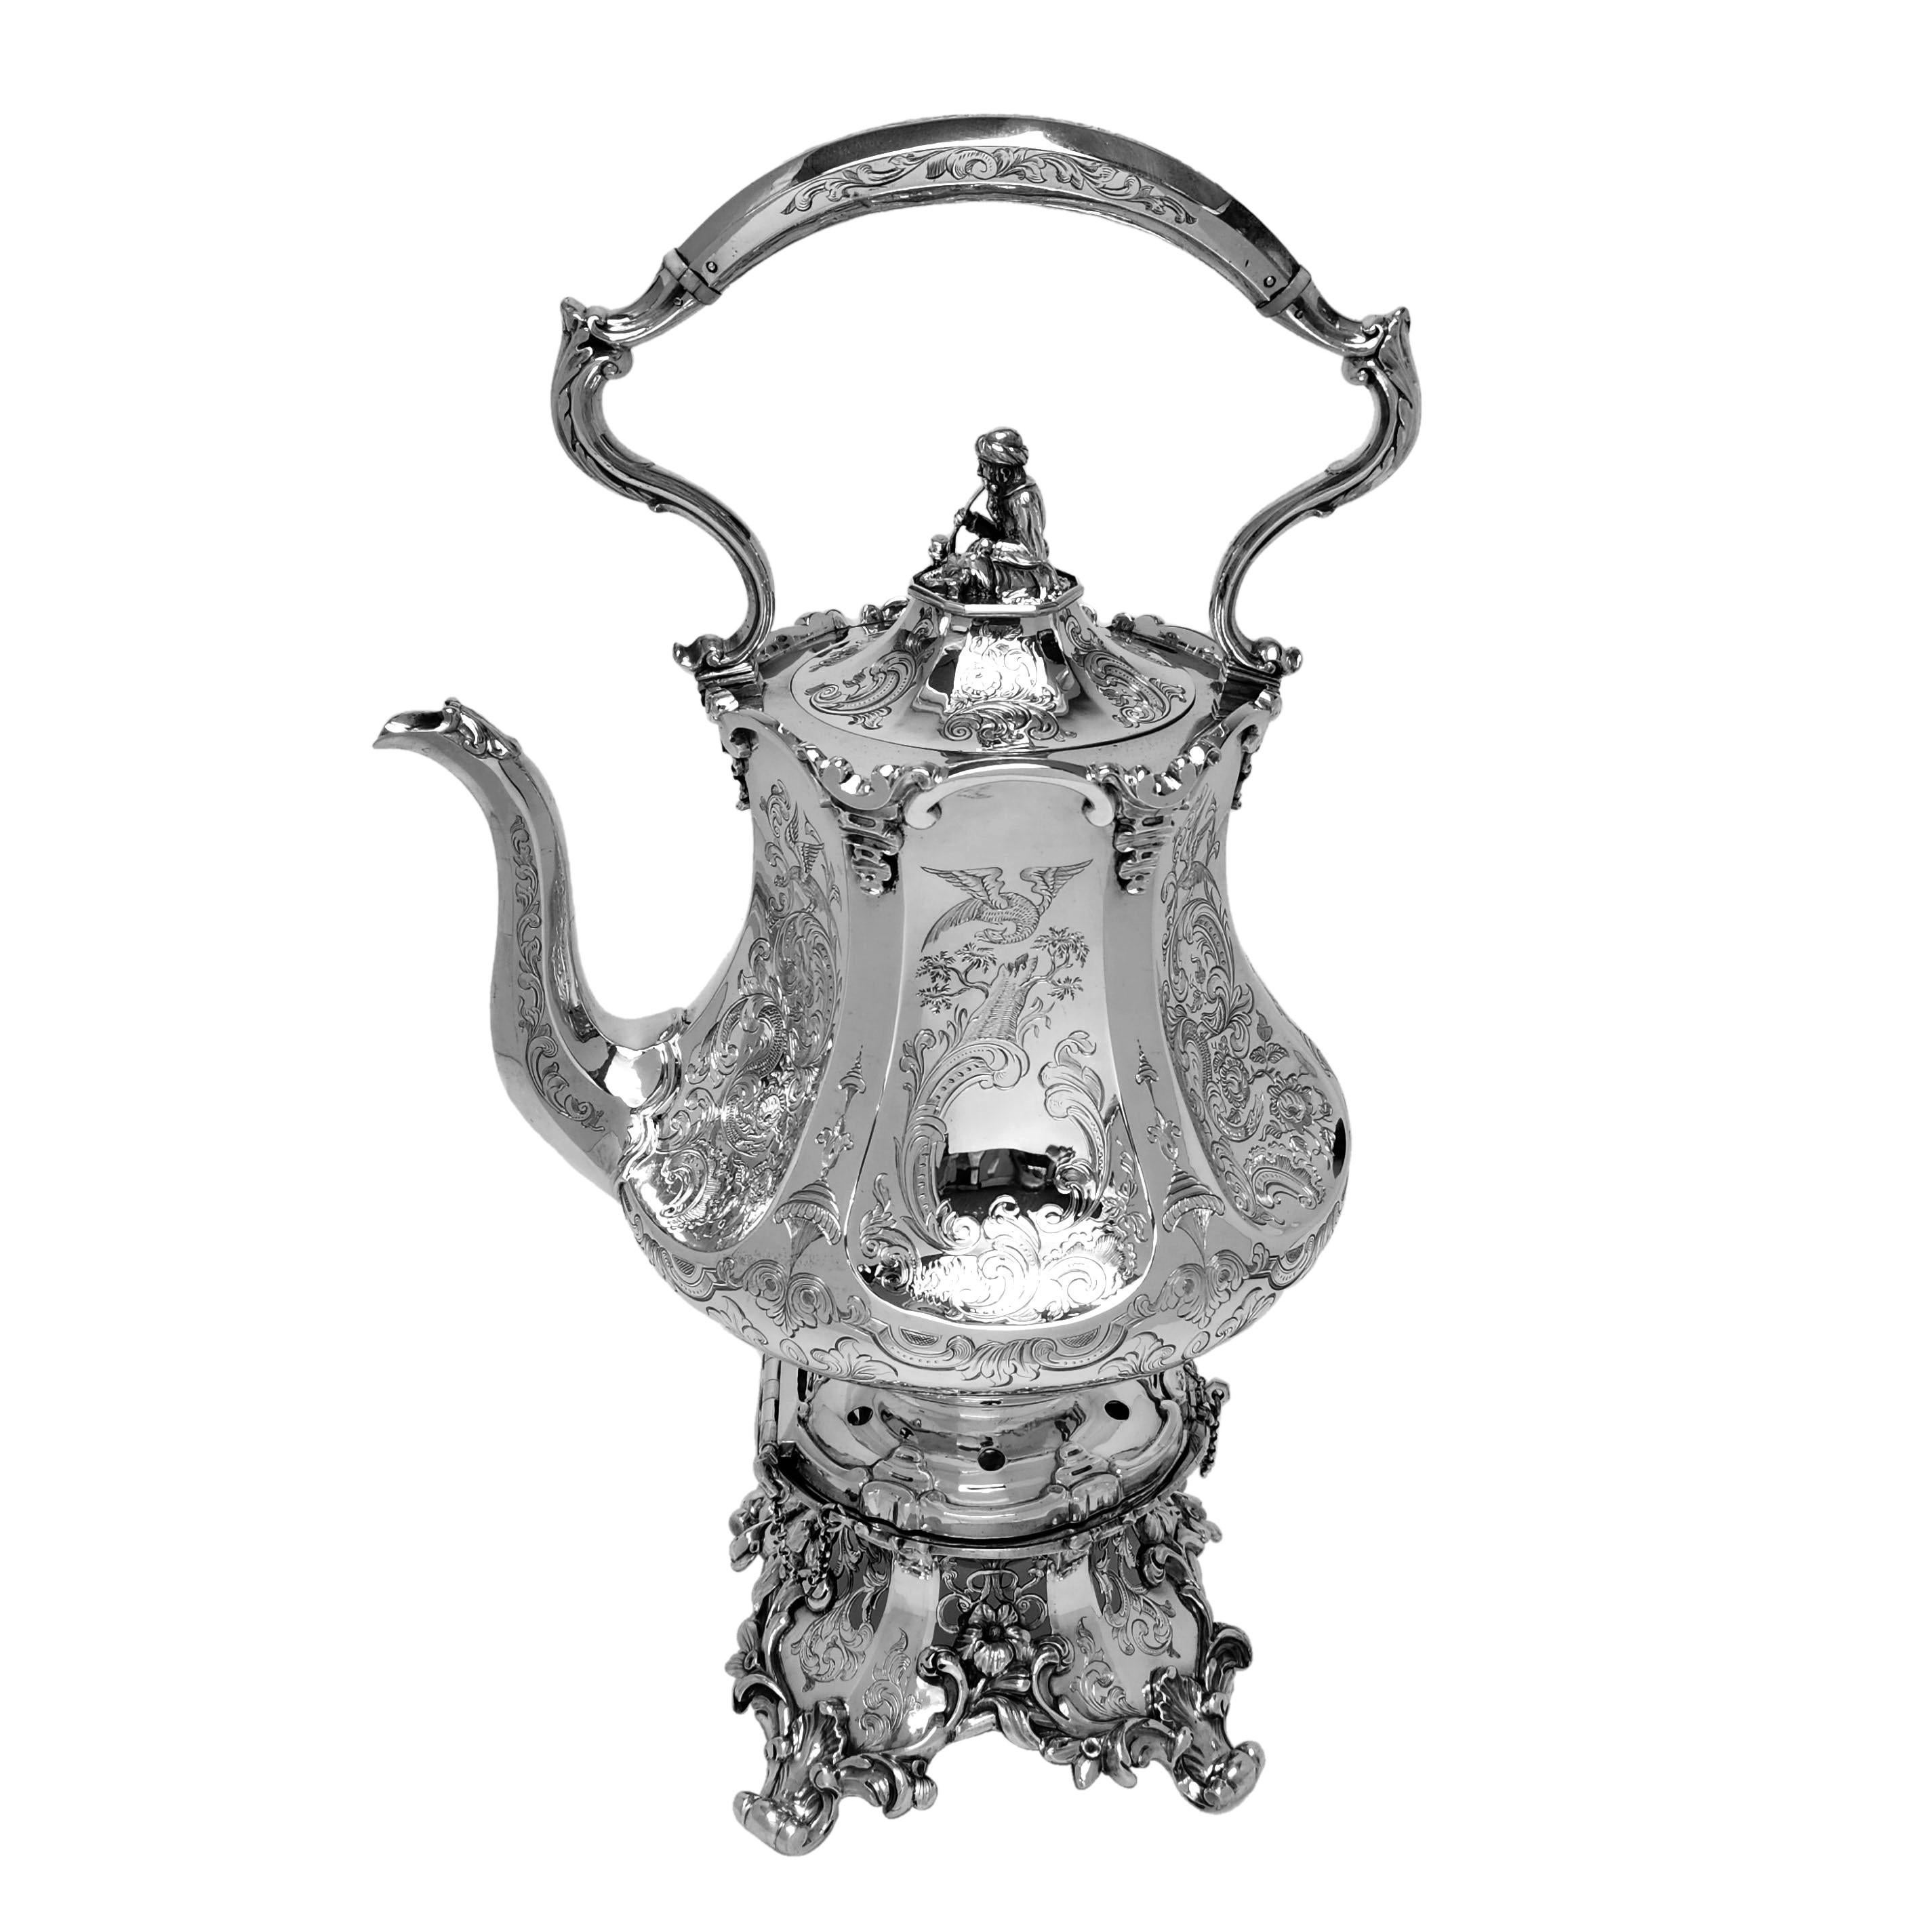 19th Century Antique Victorian Silver Kettle on Stand 1843 London England For Sale